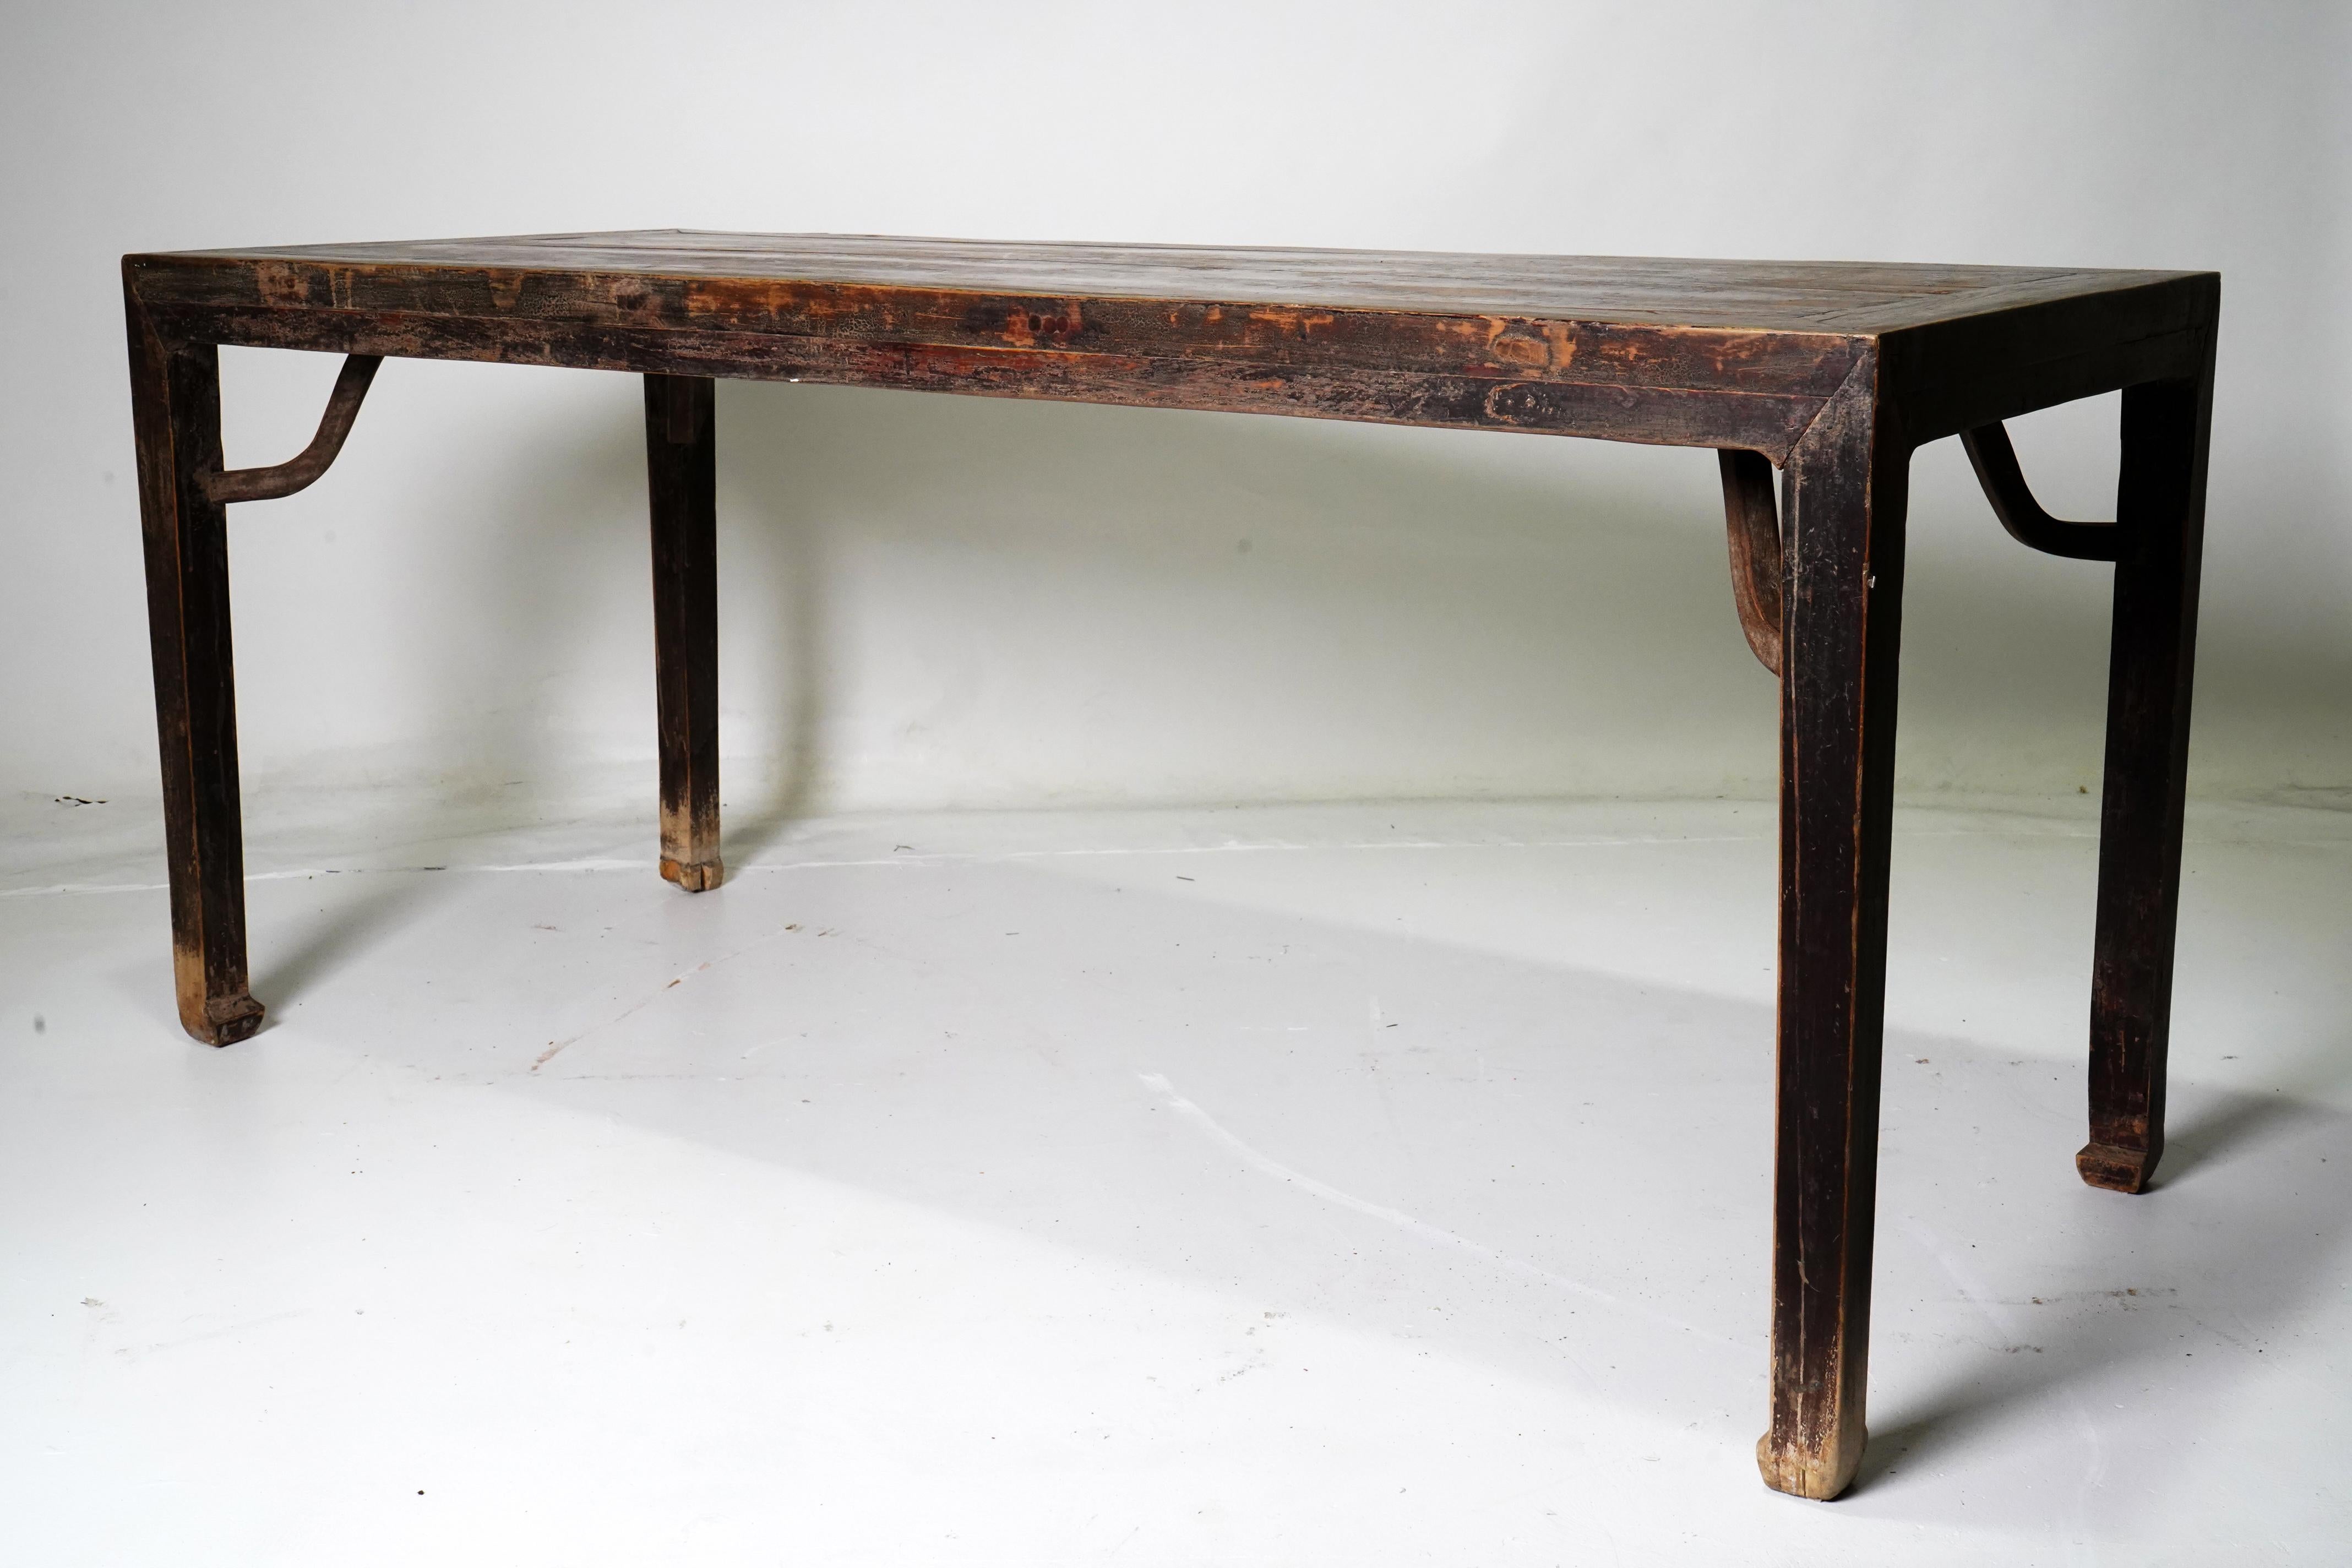 19th Century C. 1850 Ming Style Chinese Painting Table with Horse Hoof Legs For Sale